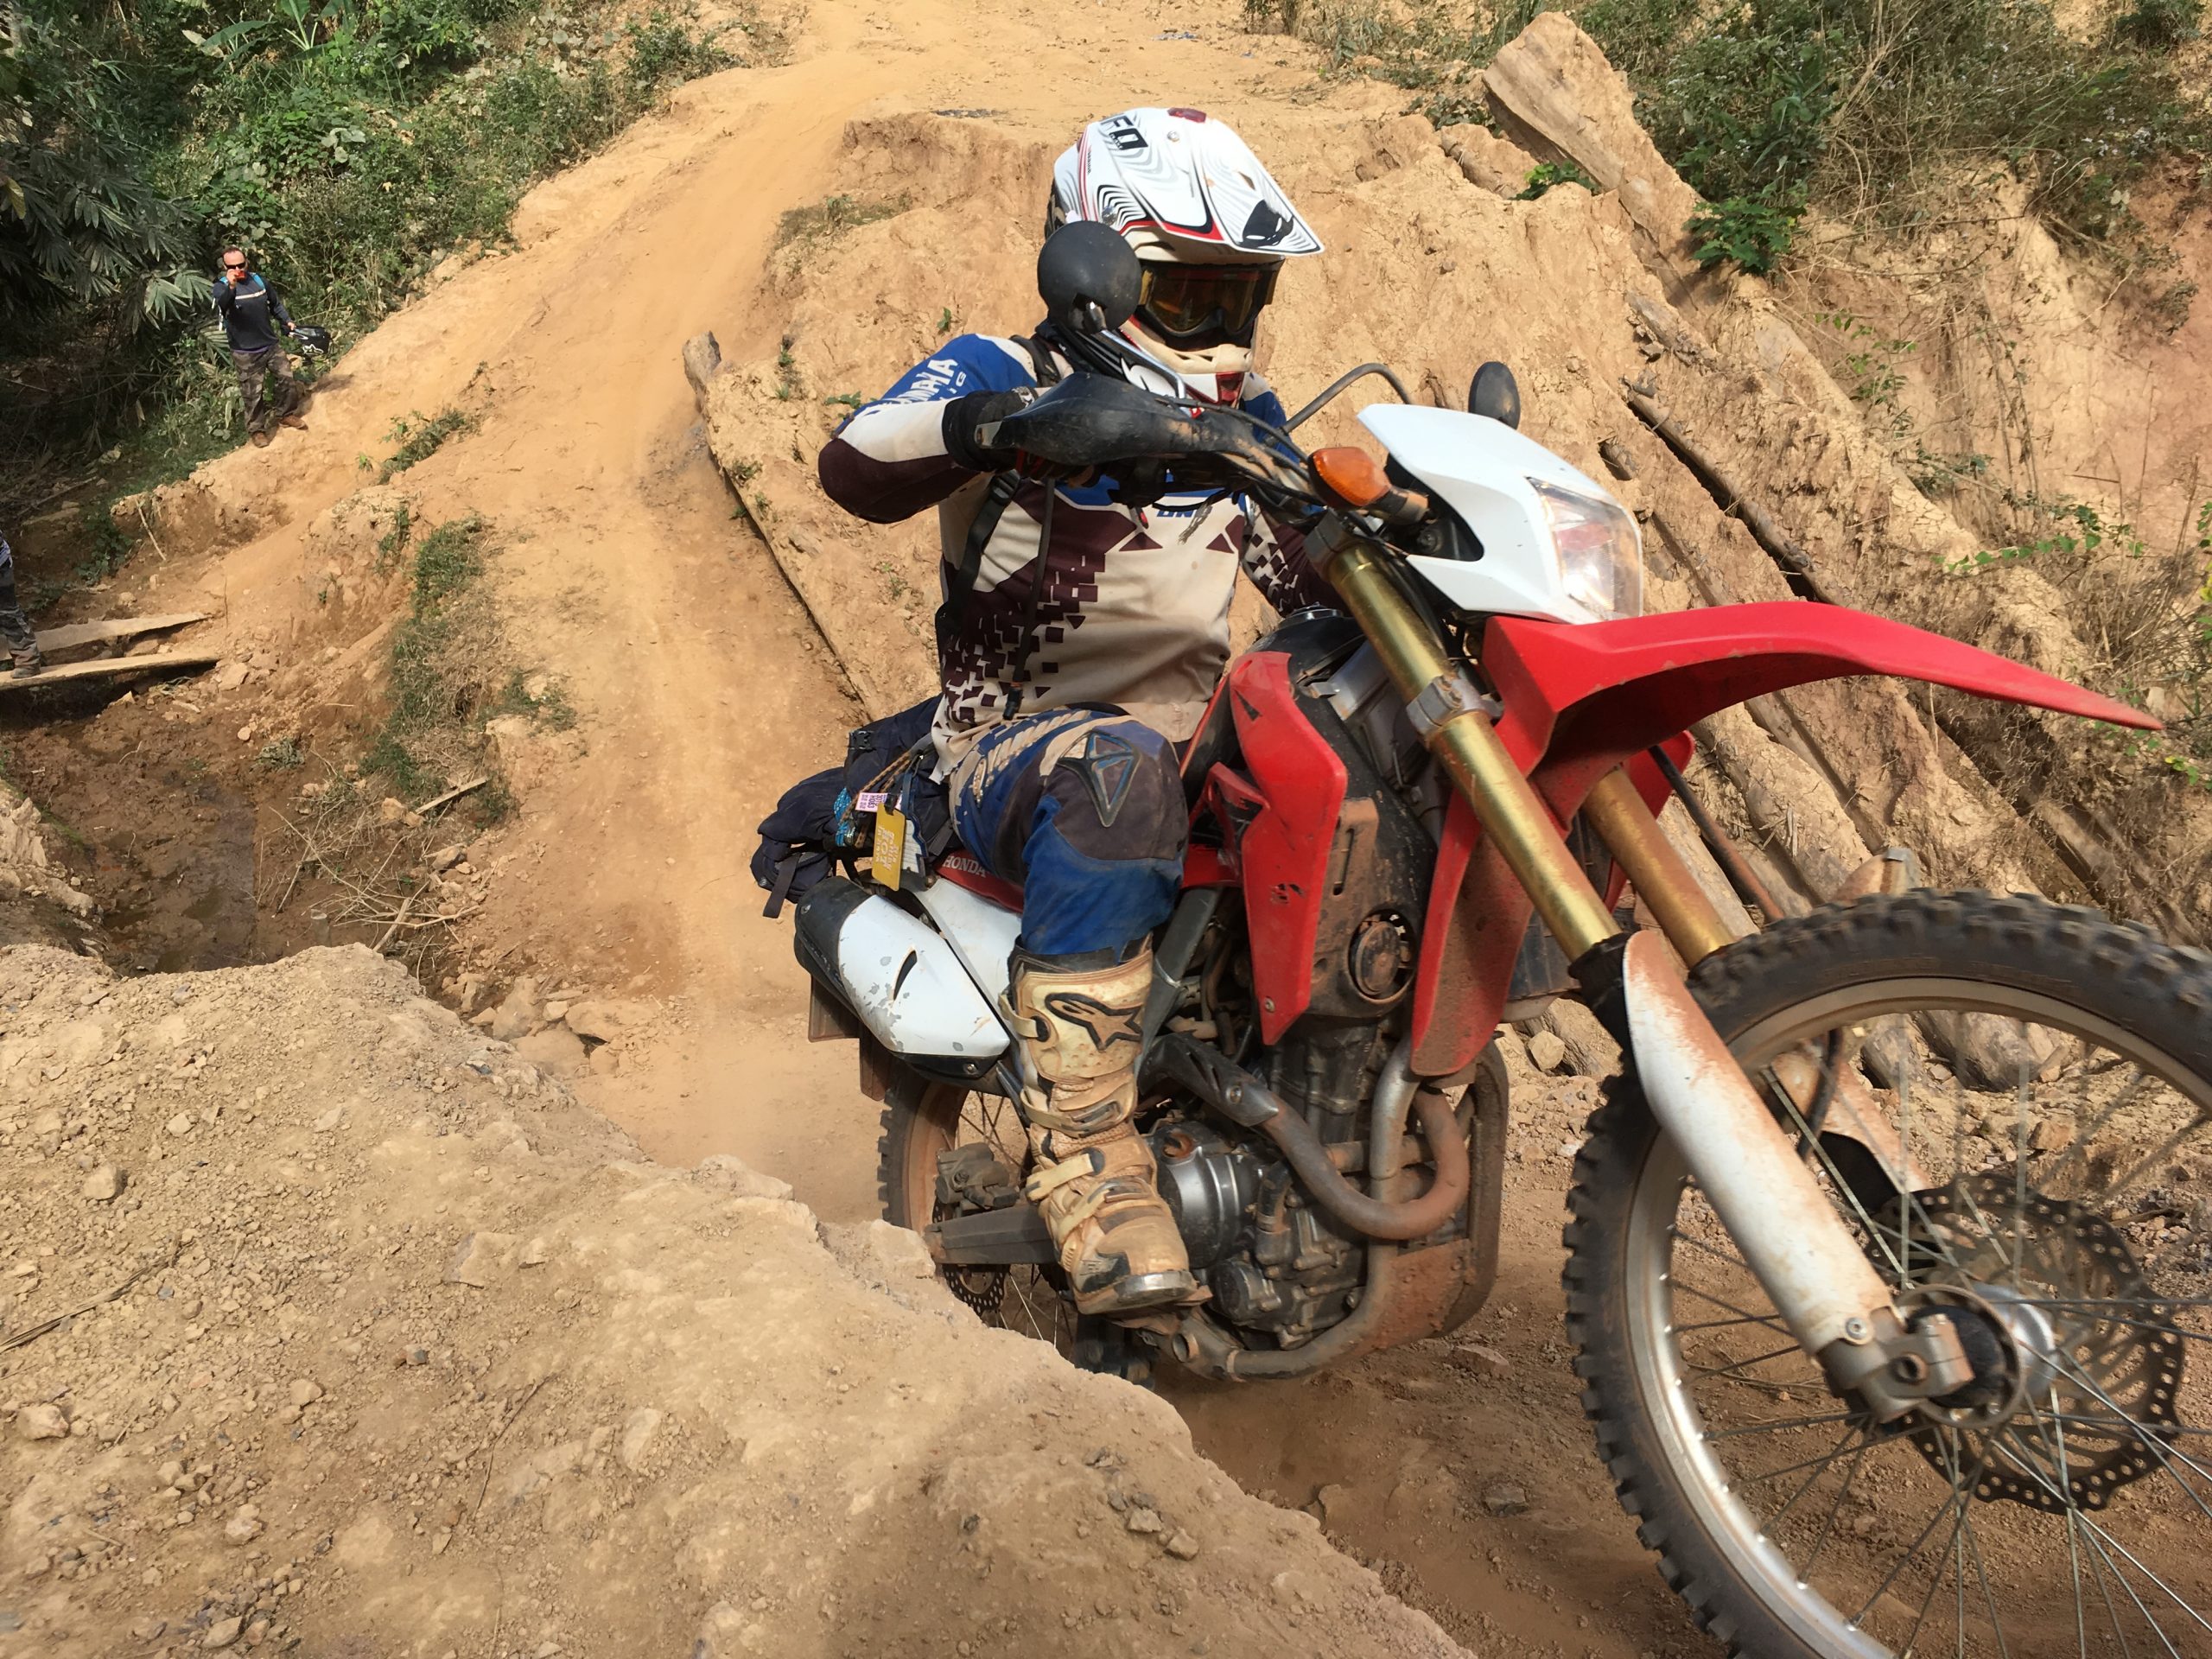 the Ho Chi Minh Trail can be an uphill struggle at times